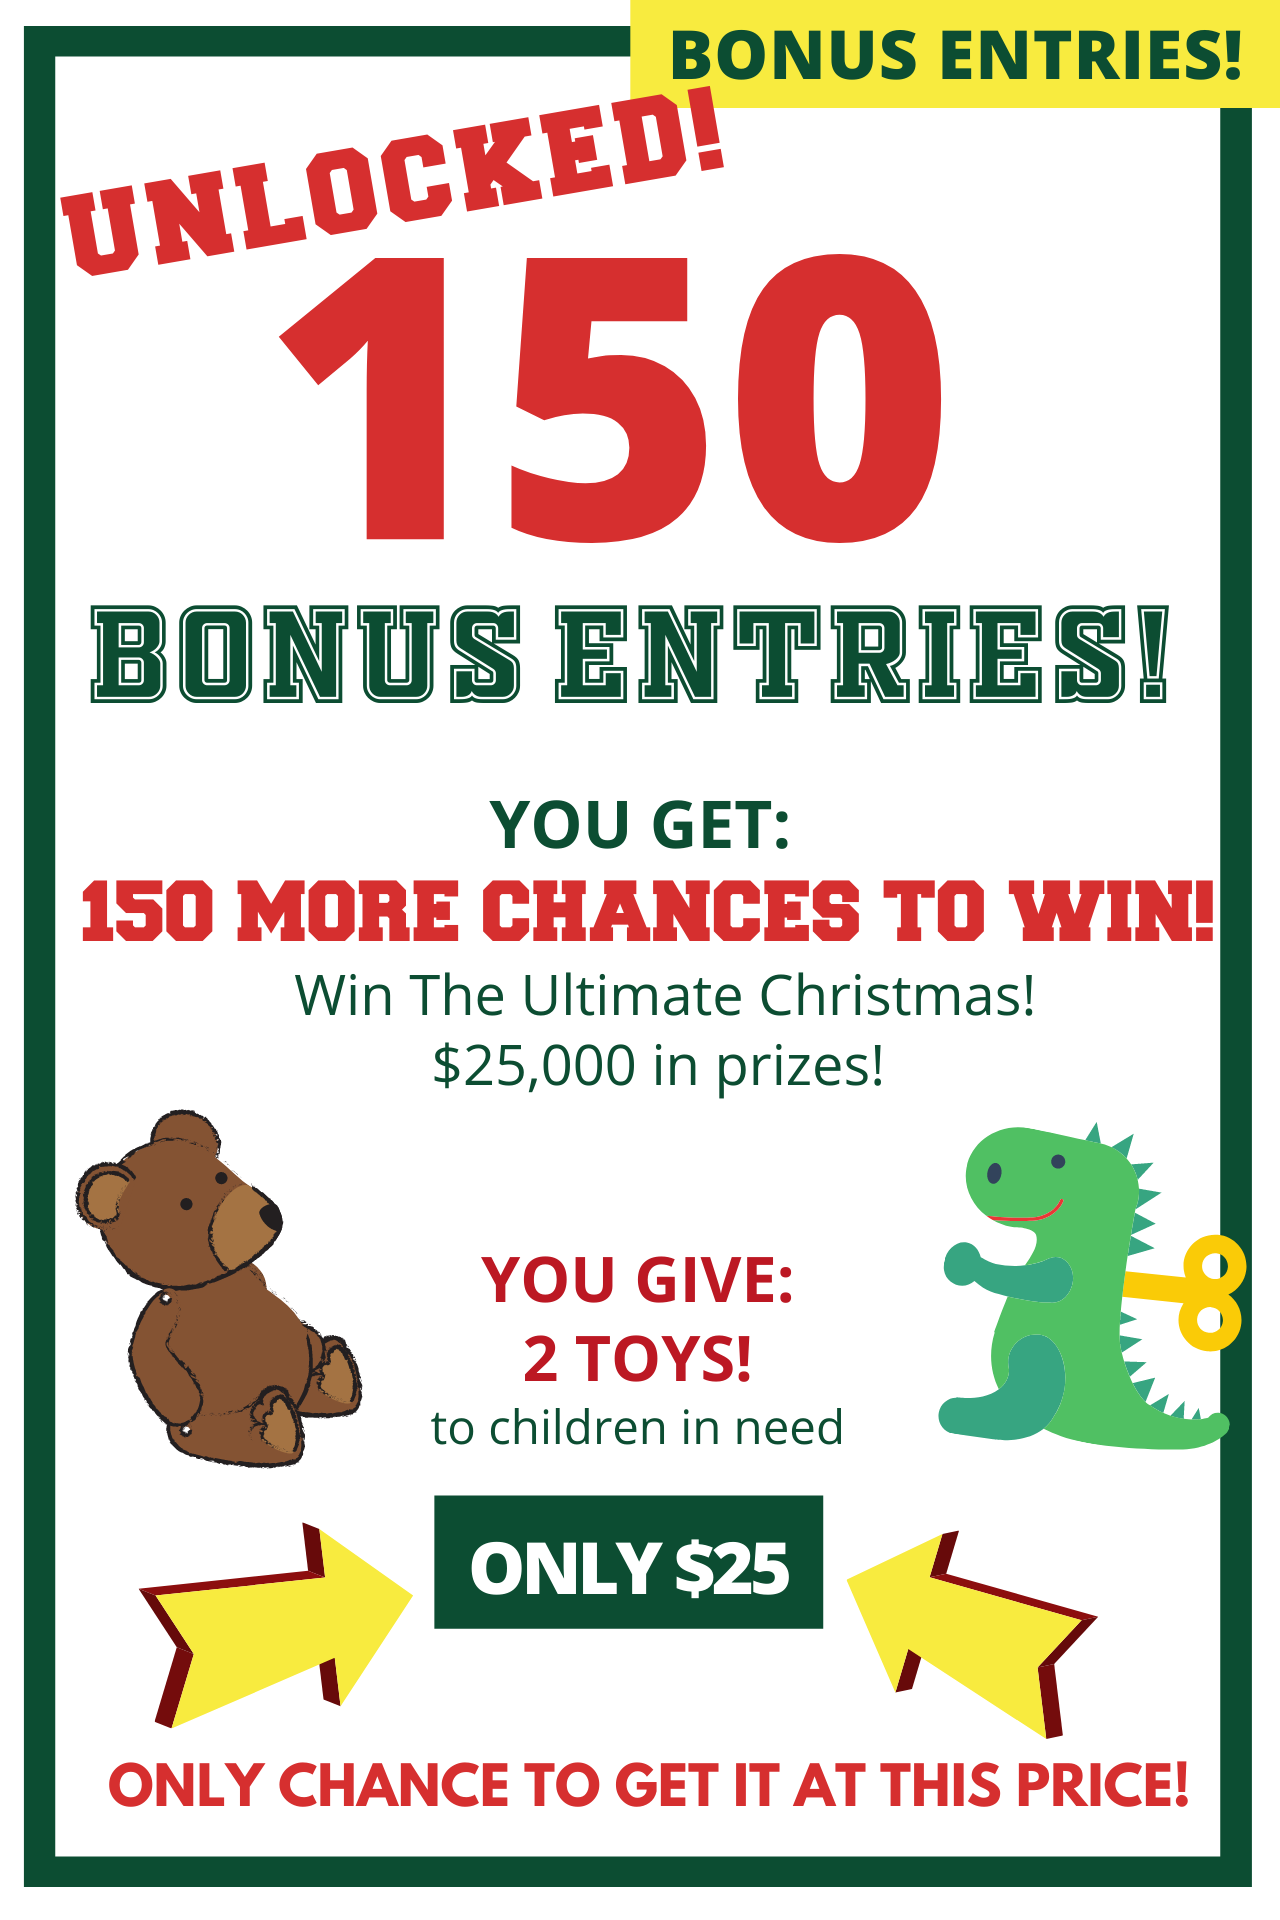 CONGRATULATIONS! YOU UNLOCKED 150 Bonus Entries! Give 2 children in need a toy + 150 More Chances to Win "Christmas in Not Cancelled" Sweepstakes!